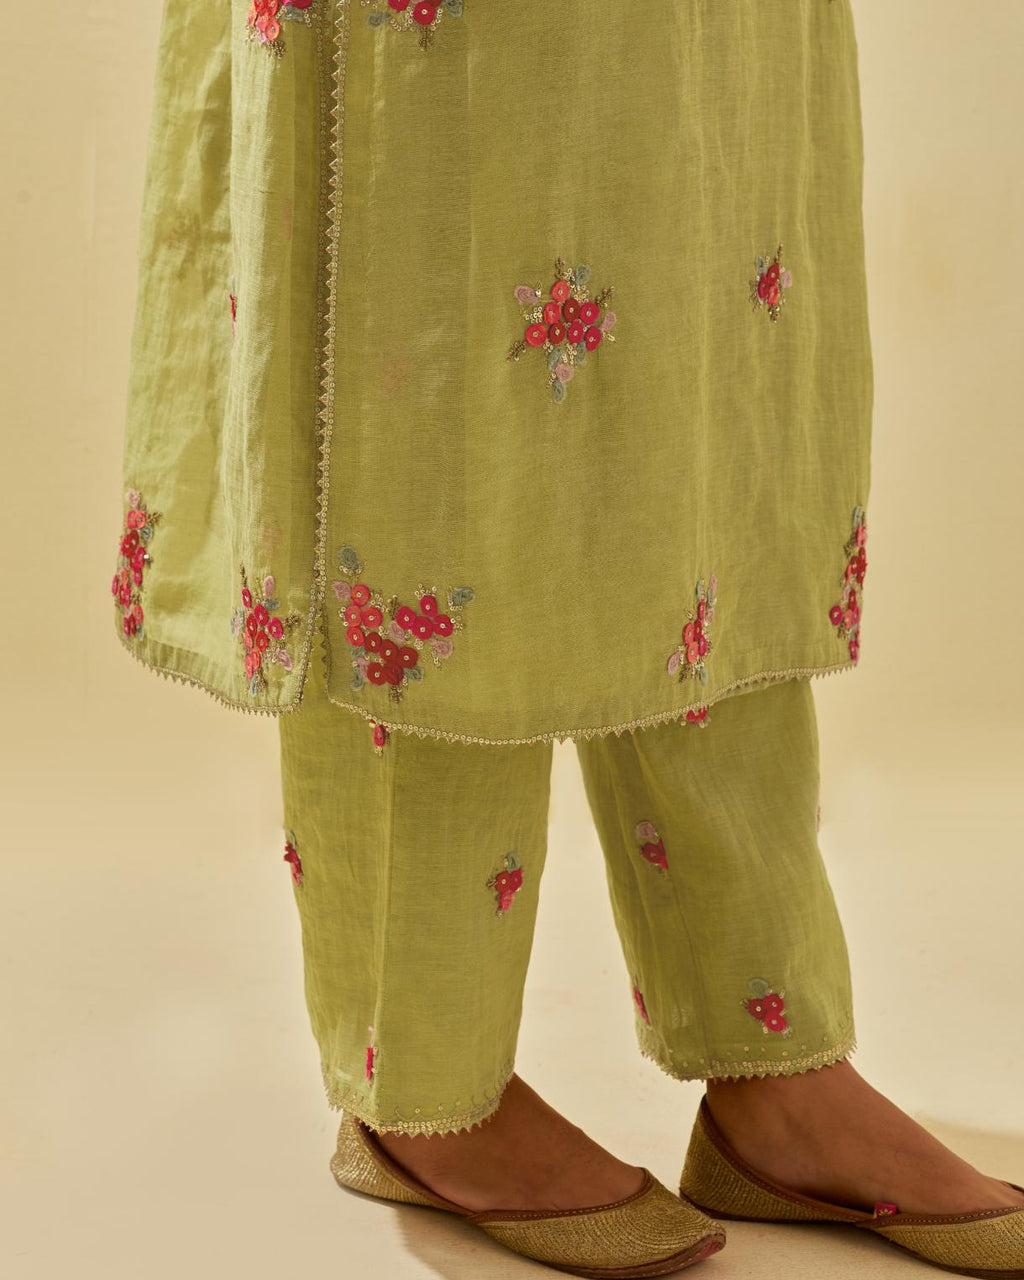 Green tissue chanderi straight kurta set with randomly placed hand cut silk flower bunches, highlighted with gold sequins.